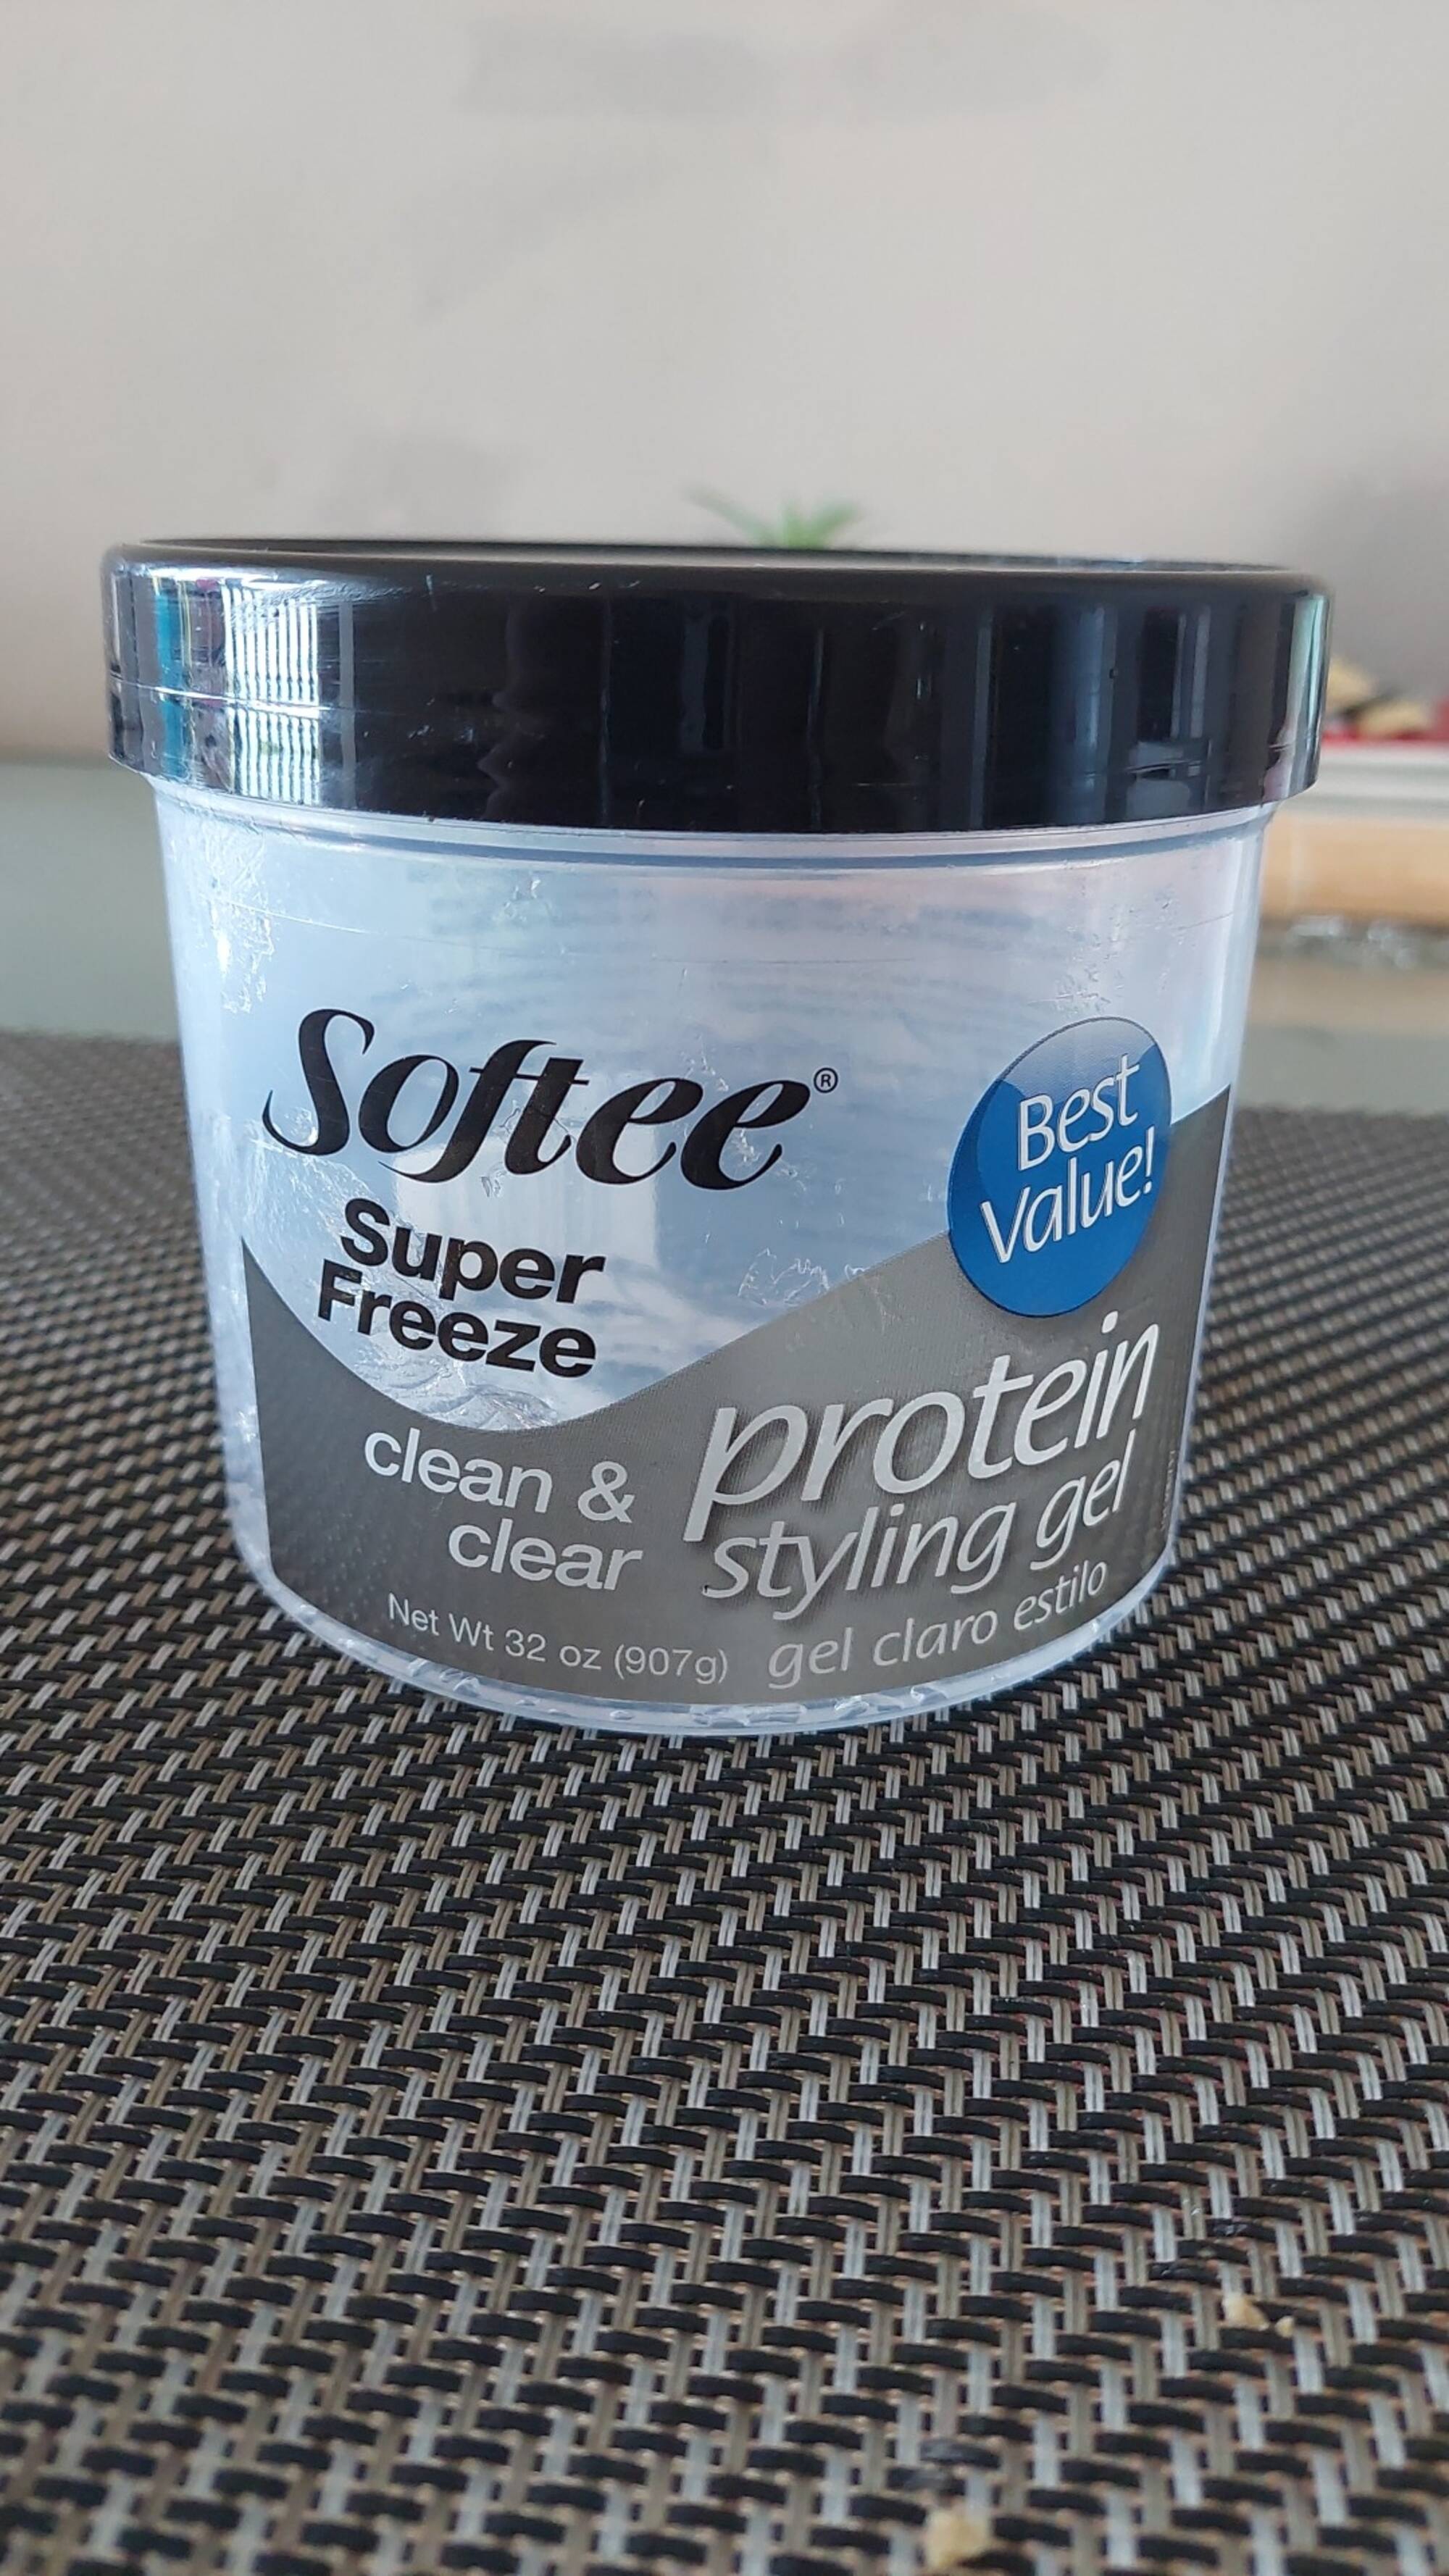 SOFTEE - Super freeze  - Protein styling gel